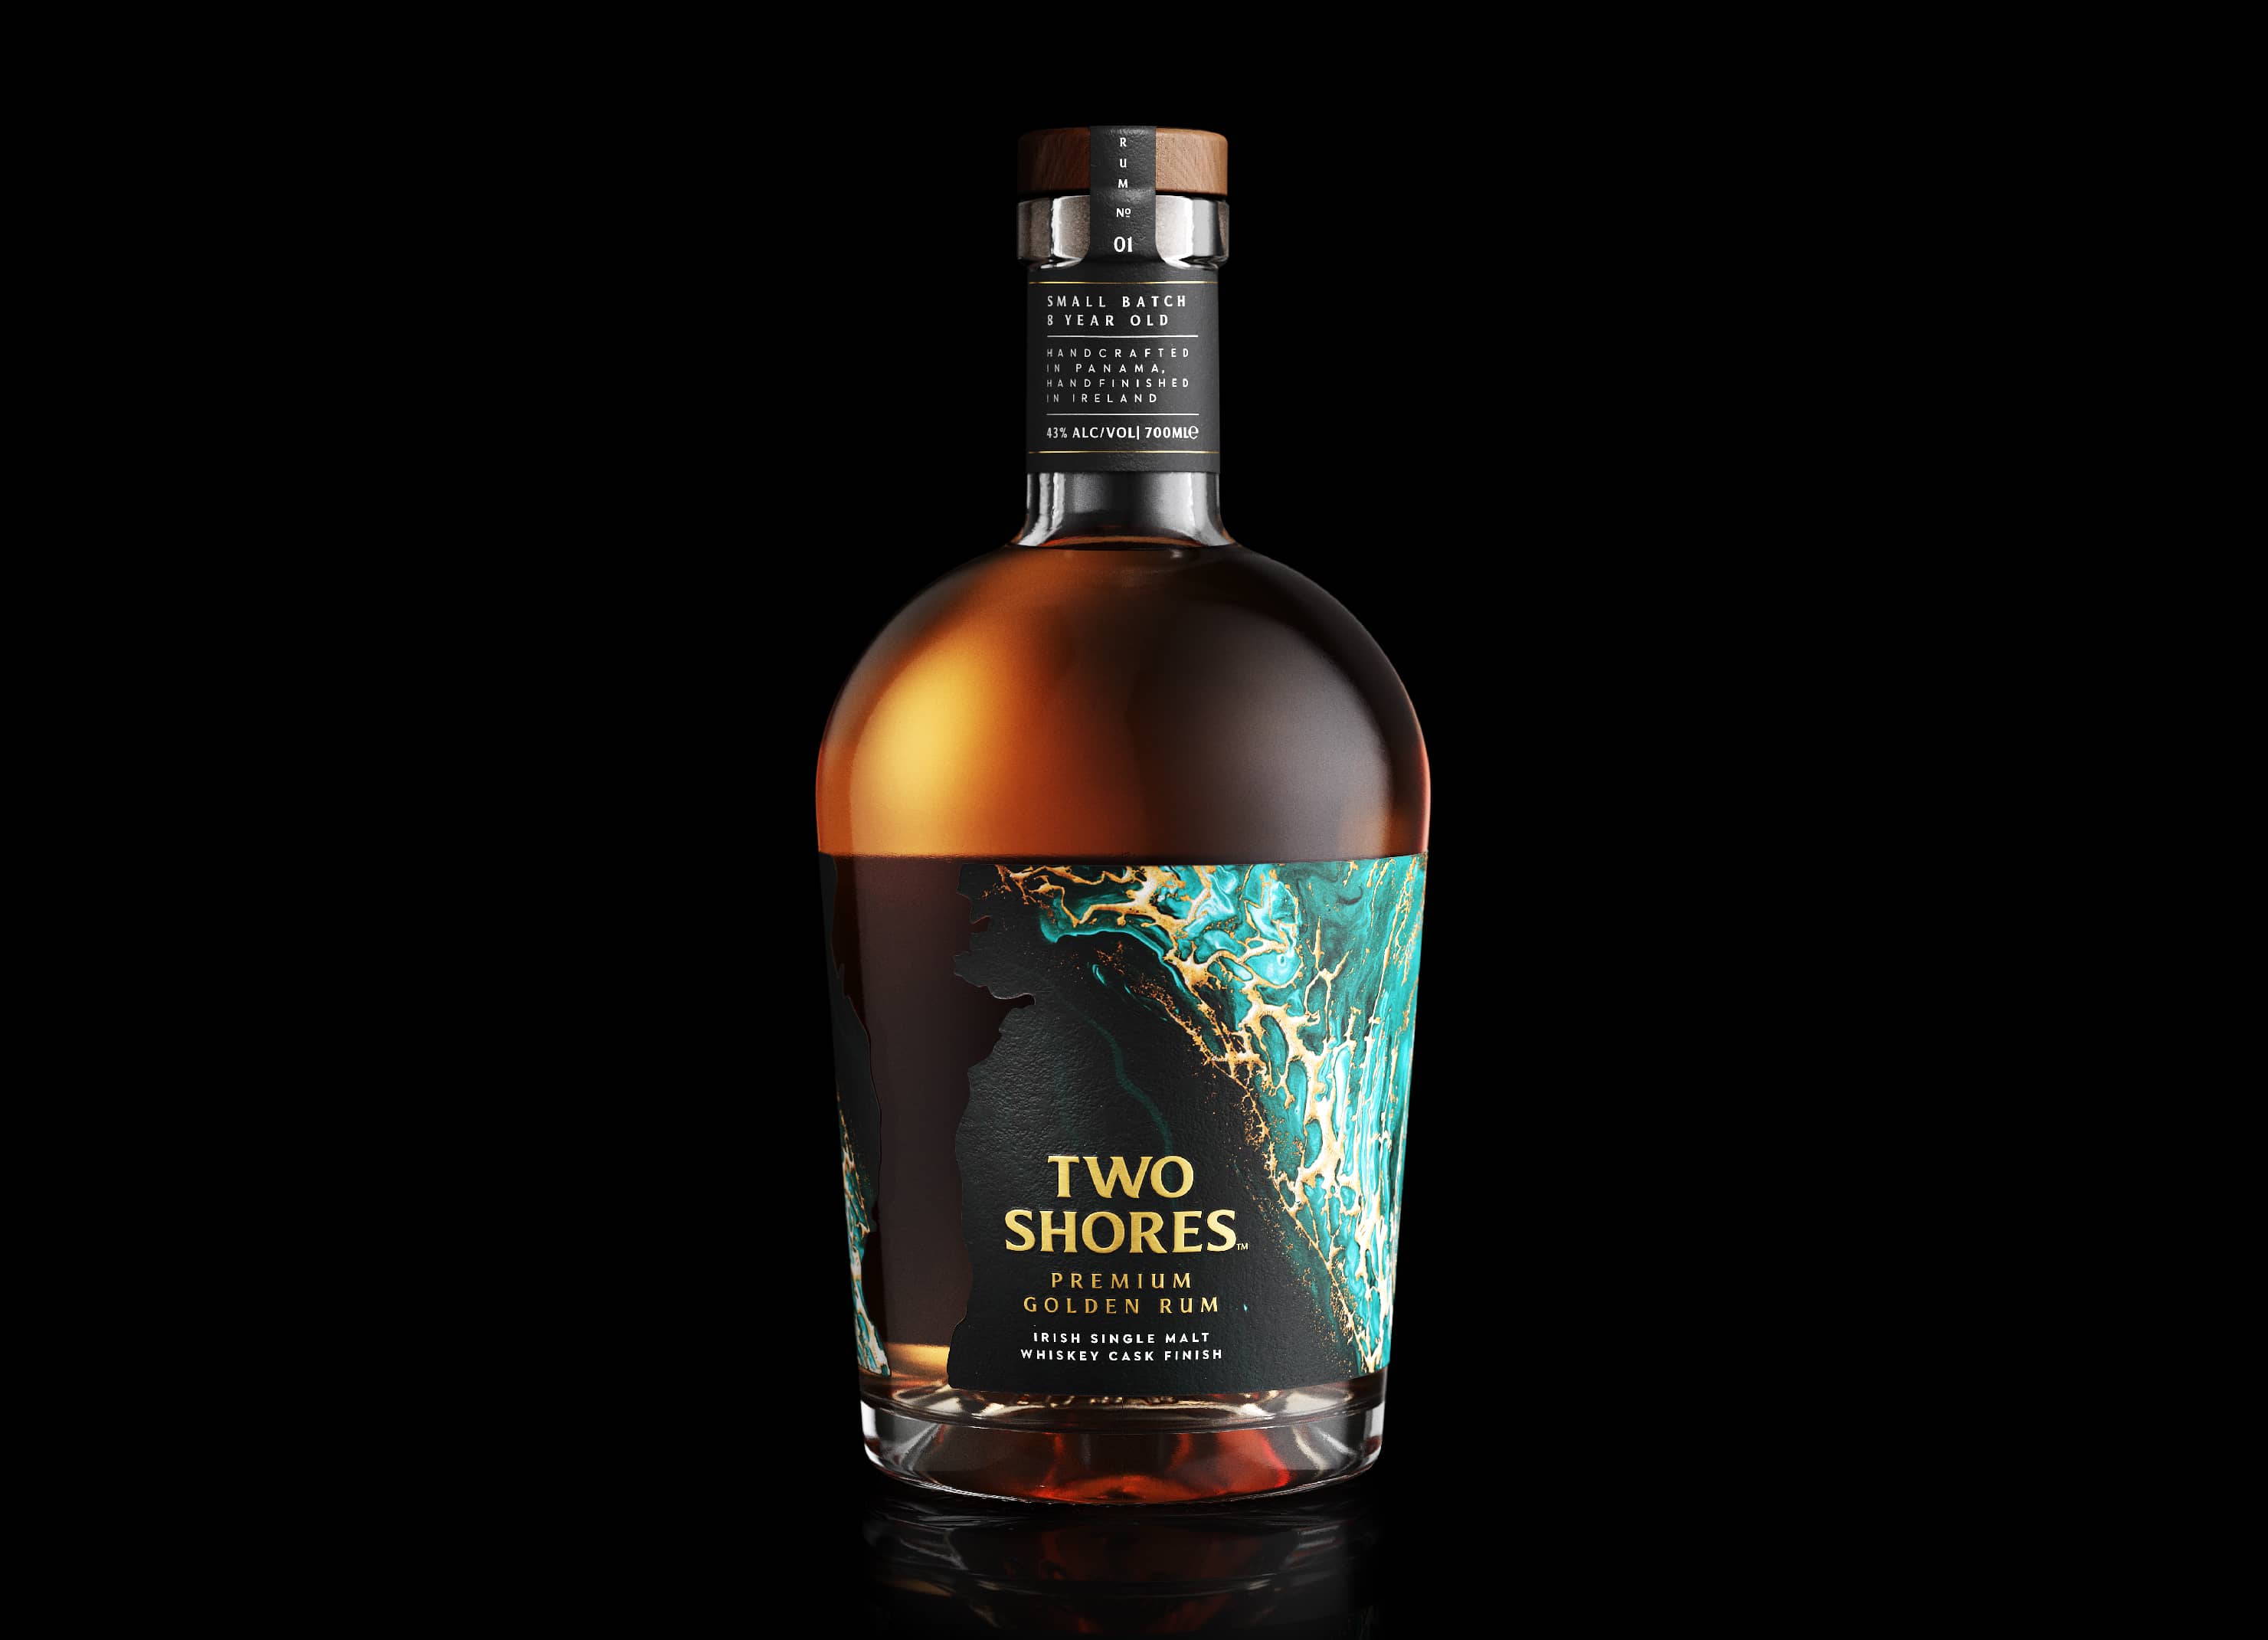 Two Shores – A Unique Rum Born of Two Continents